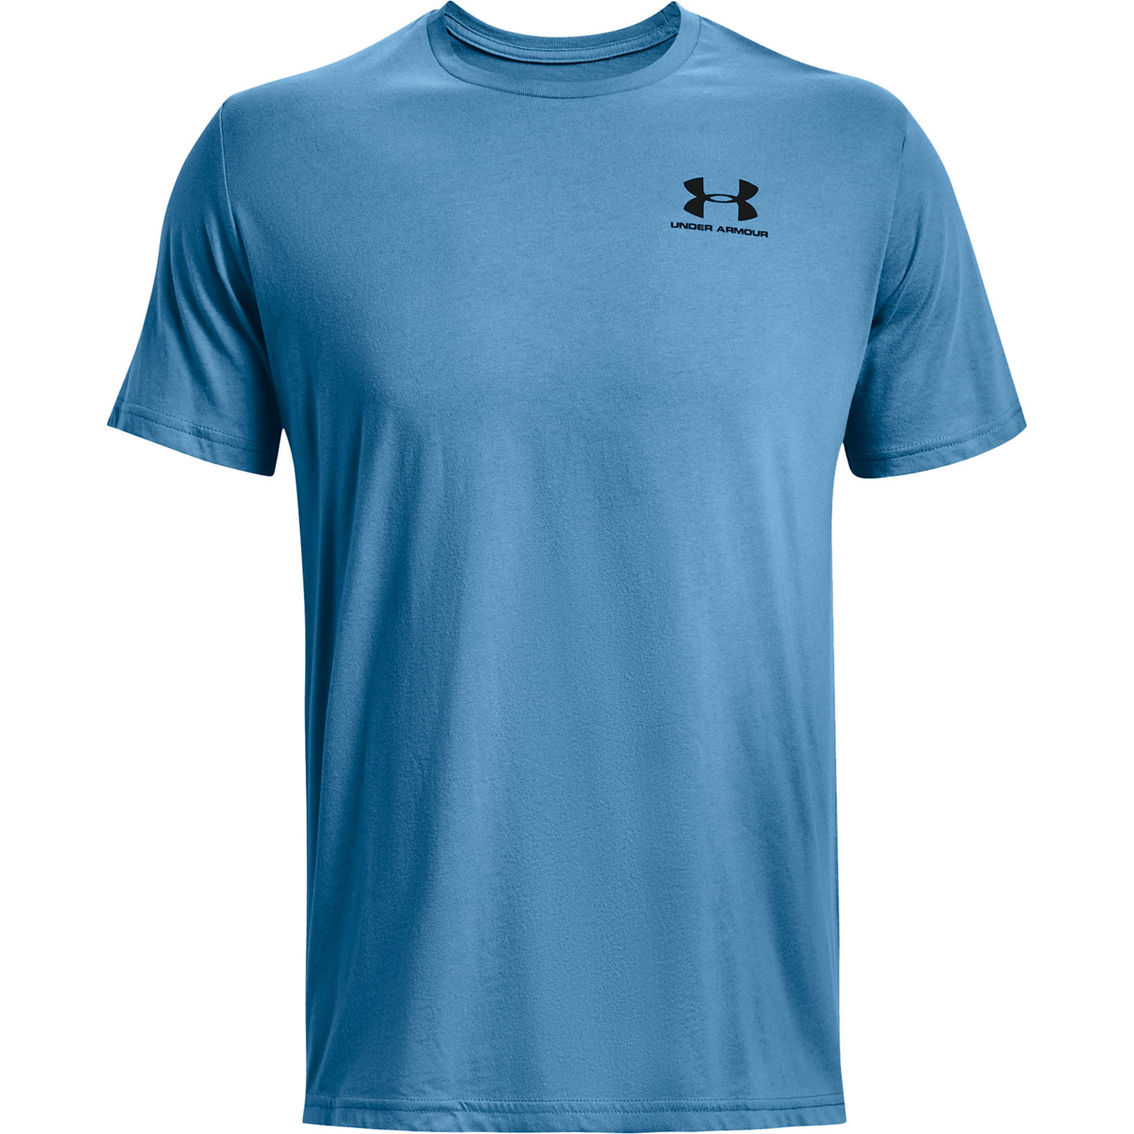 Under Armour Sportstyle Left Chest Shirt | Shirts | Clothing ...